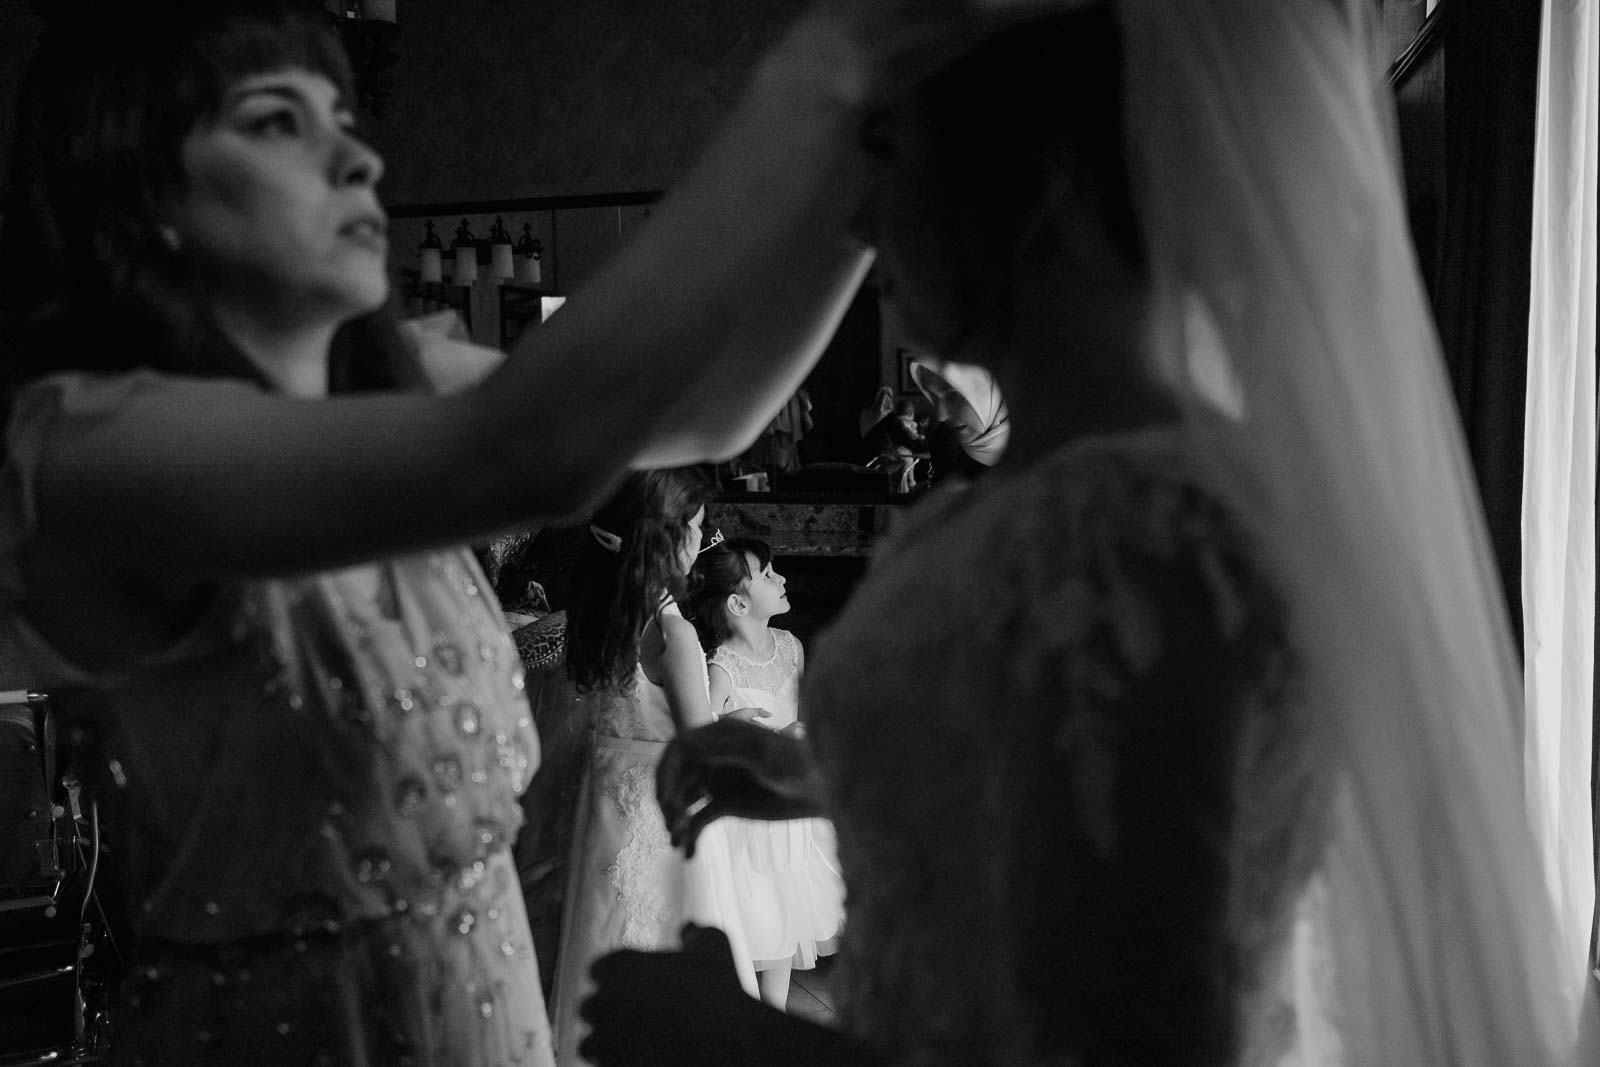 A flower girl looks up towards her mother as the bride’s friend fixes her veil